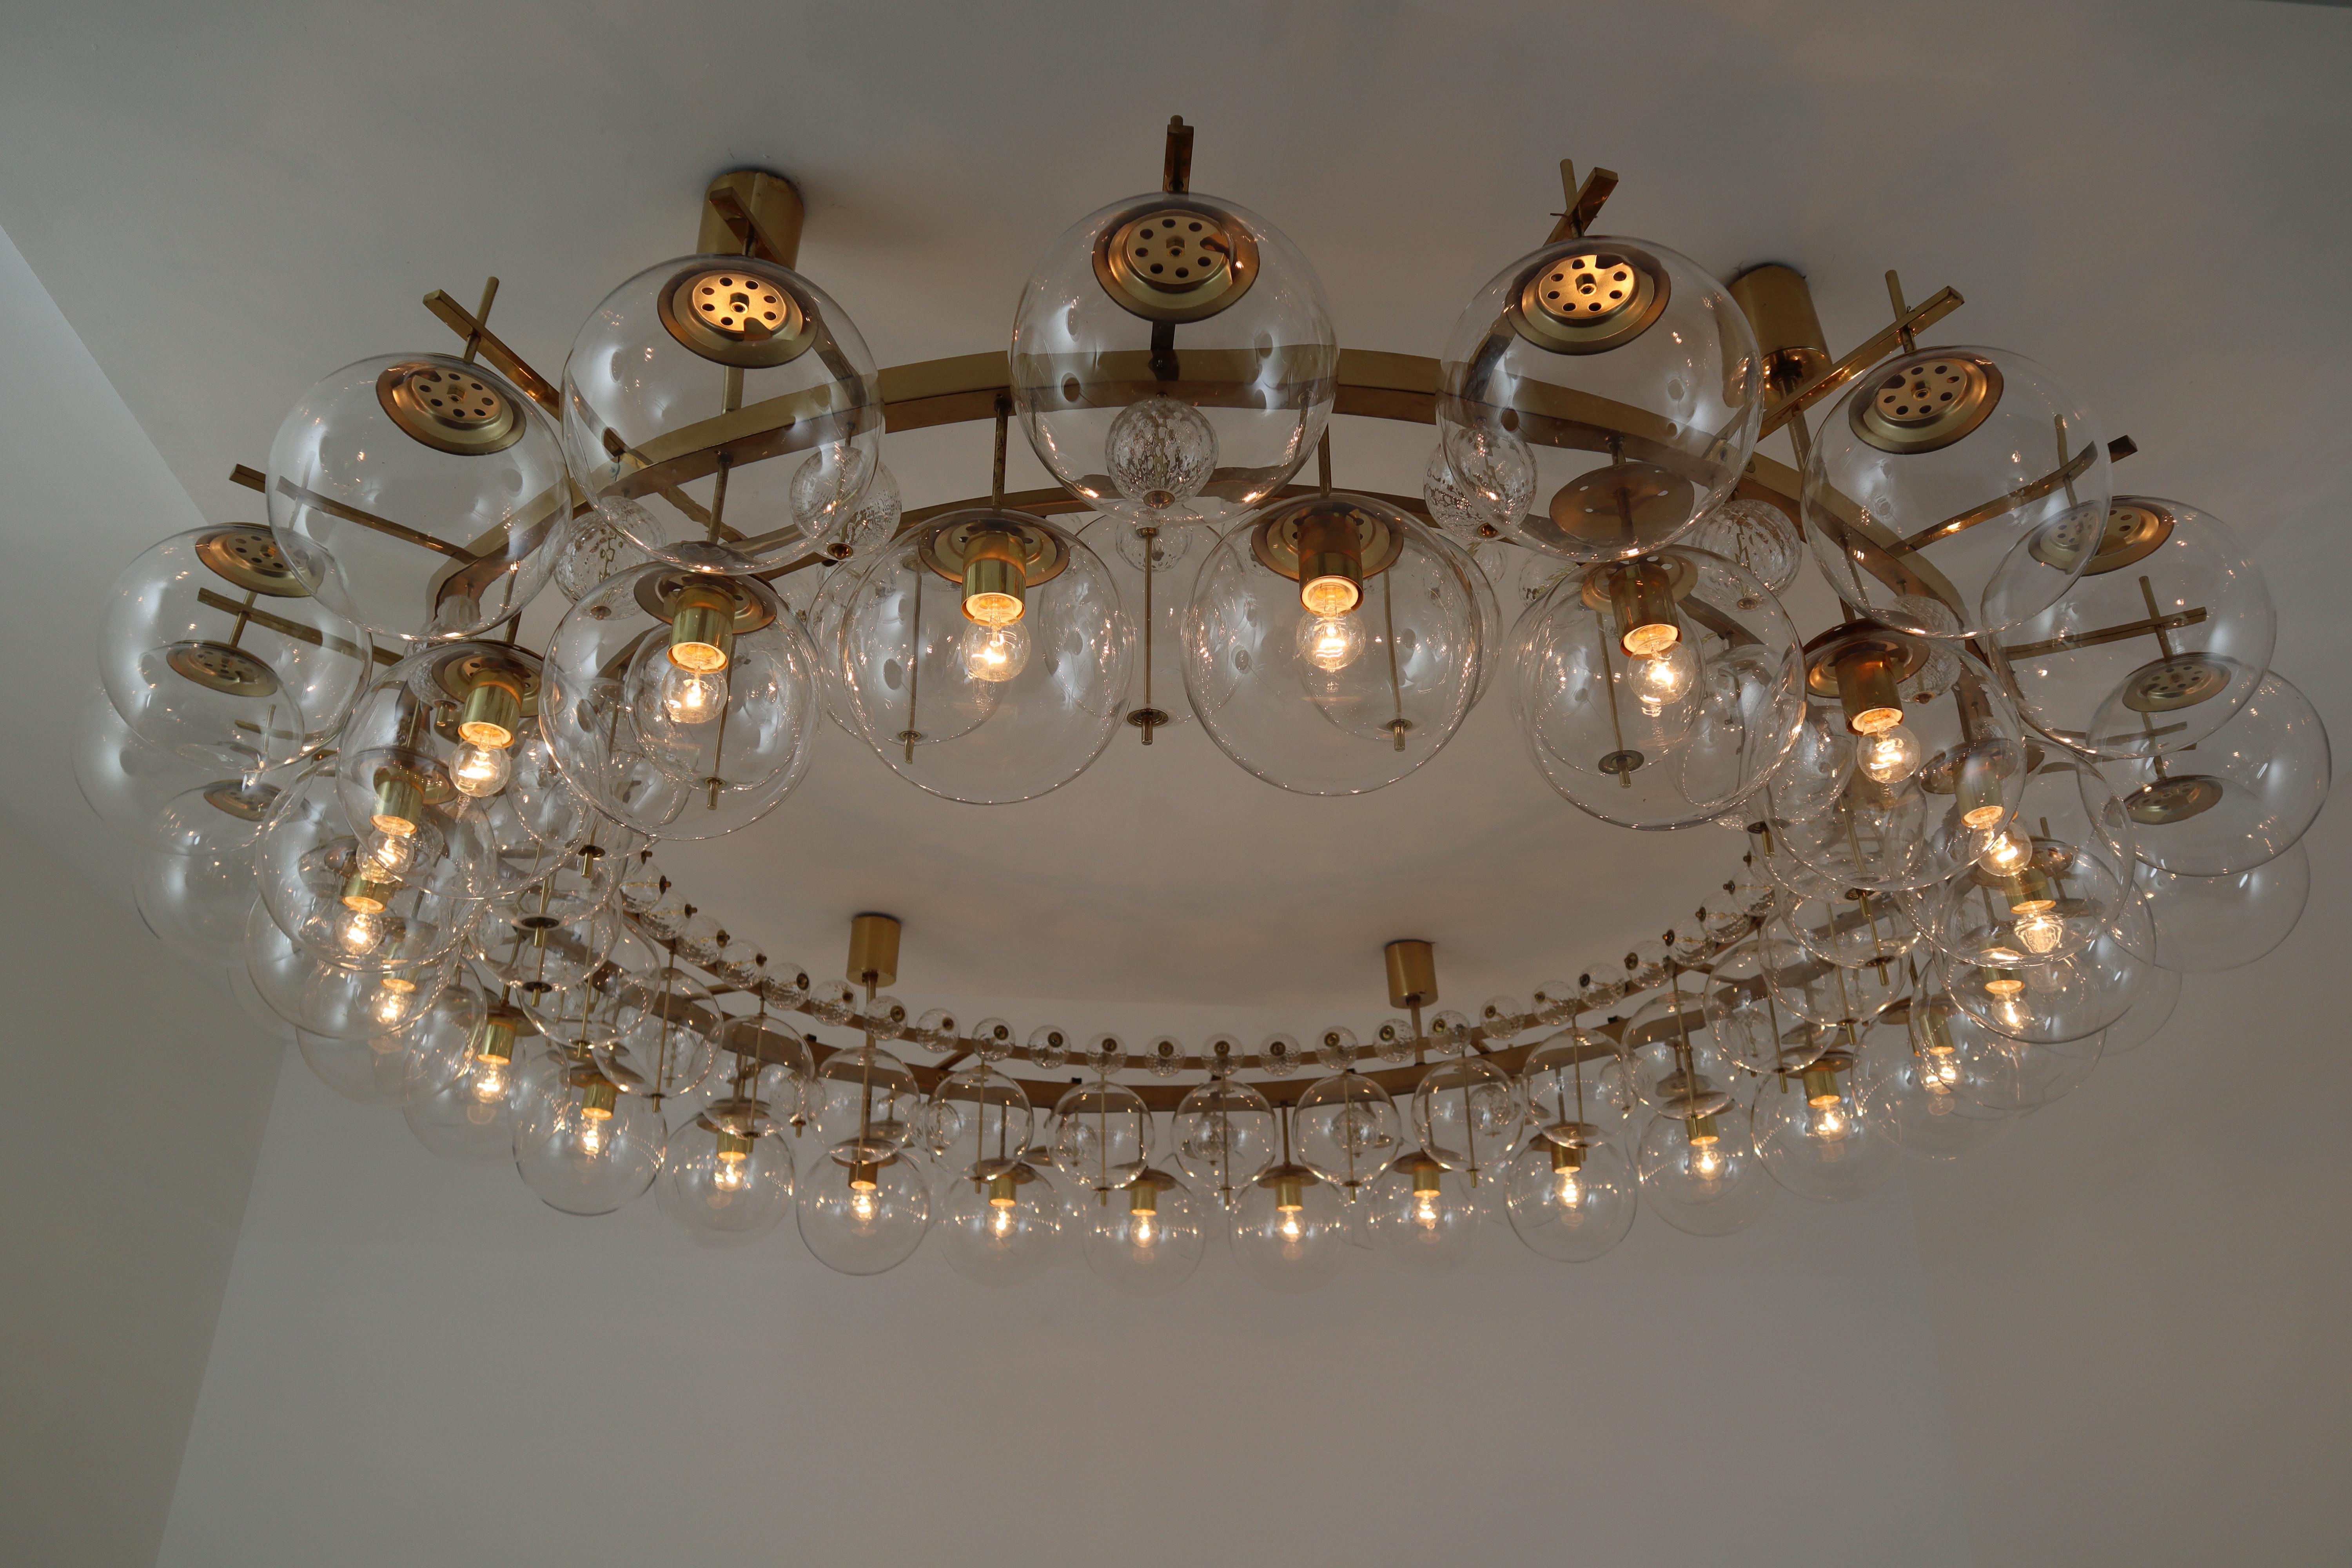 Two Extremely Large Hotel Chandeliers with Brass Fixture and Hand-Blowed Glass 2